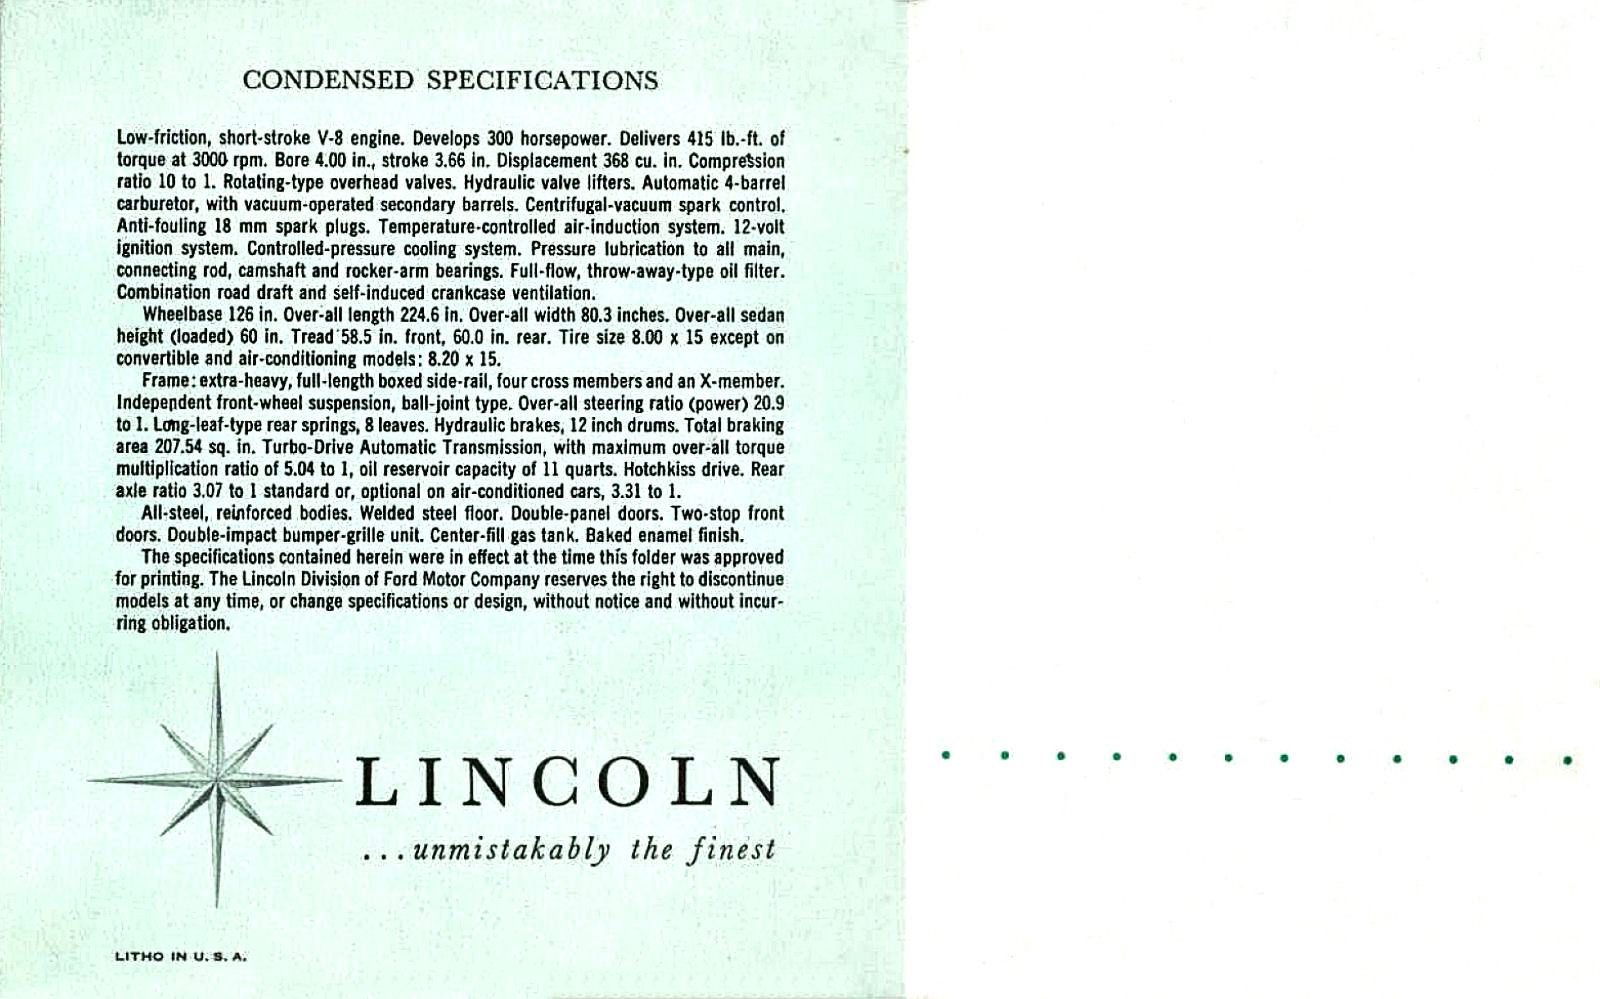 1957 Lincoln Quick Facts-16